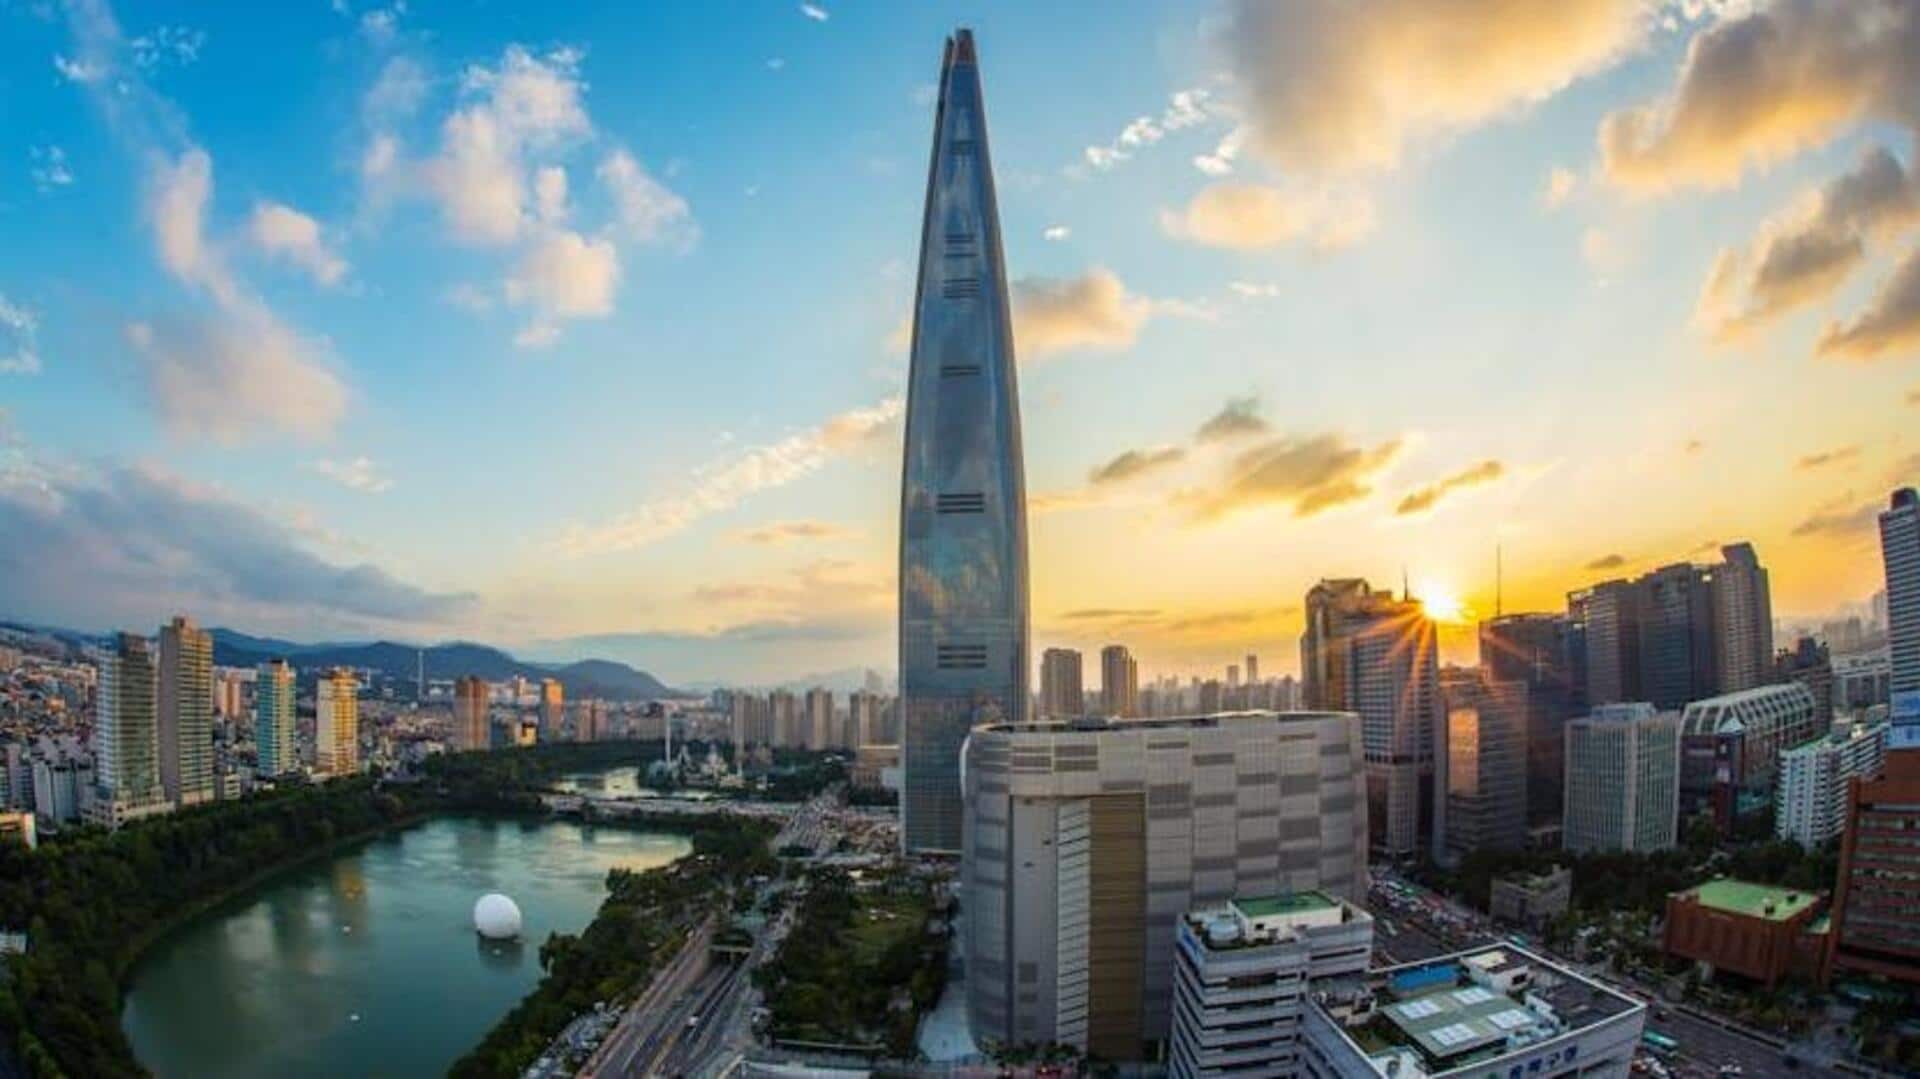 Explore Seoul's urban adventure with this travel guide